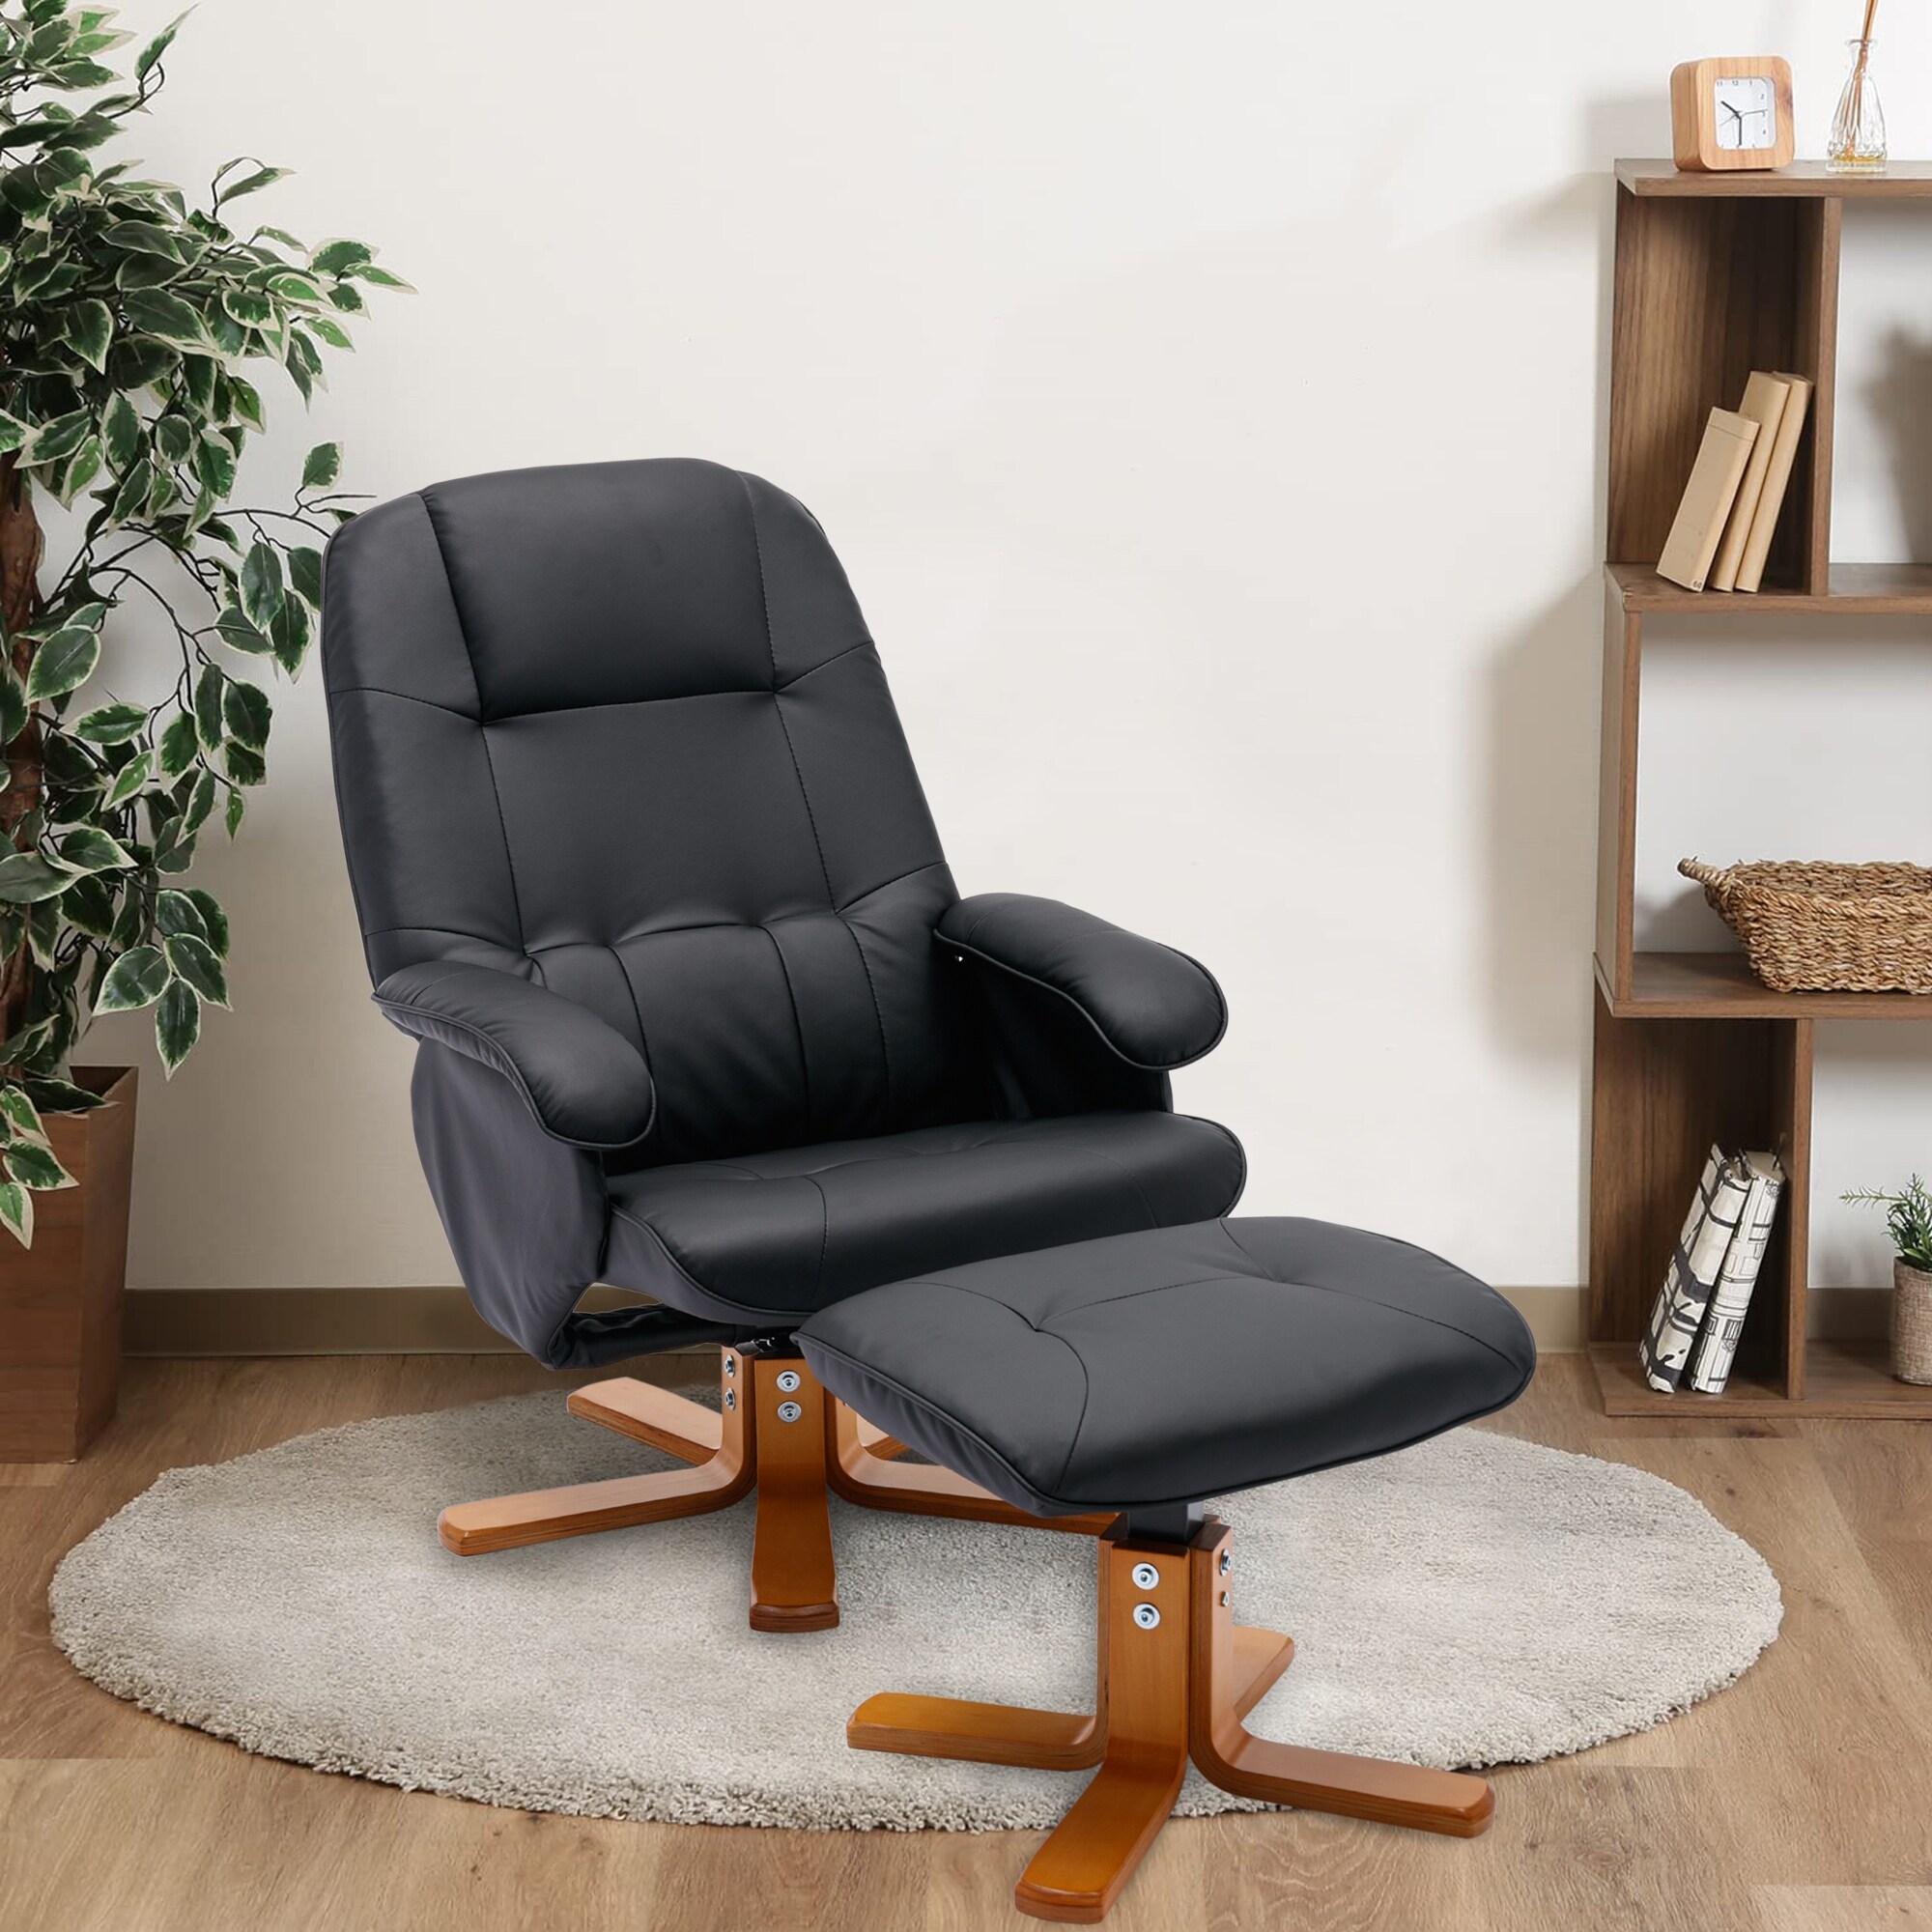 https://ak1.ostkcdn.com/images/products/is/images/direct/e0772715eb937b463849d060412ef6b9ccf90581/Leather-Upholstered-Swivel-Recliner-Chair-with-Wood-Base-and-Ottoman.jpg